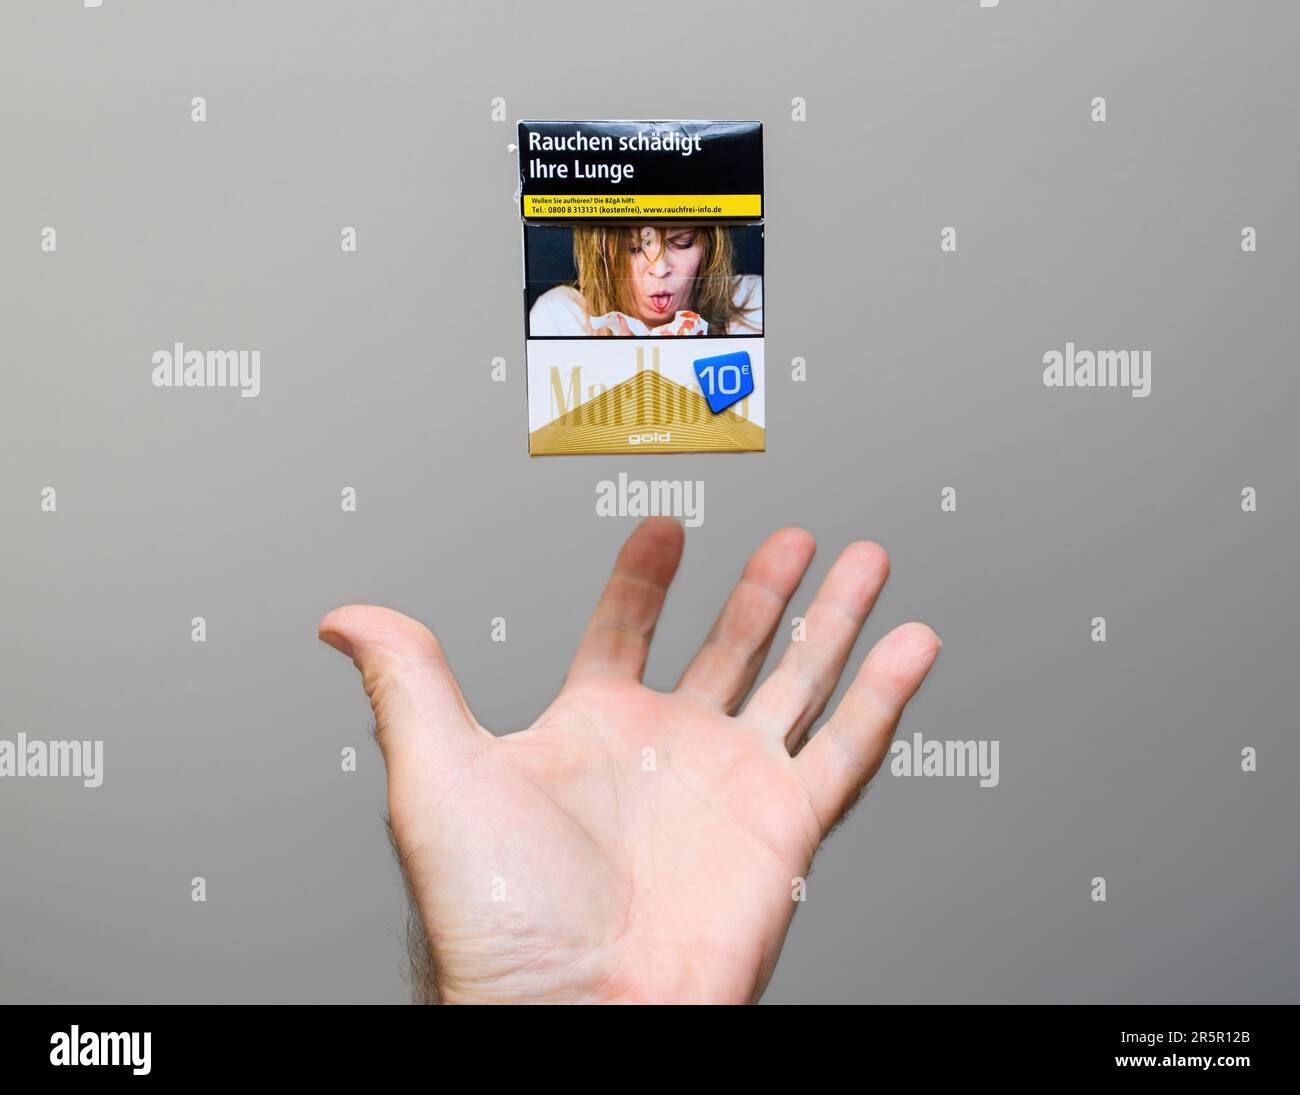 Paris, France - May 30, 2023: Hand about to catch a Marlboro cigarette pack wich is floating levitating in the air against gray background - unhealthy life concept for damage to health Stock Photo